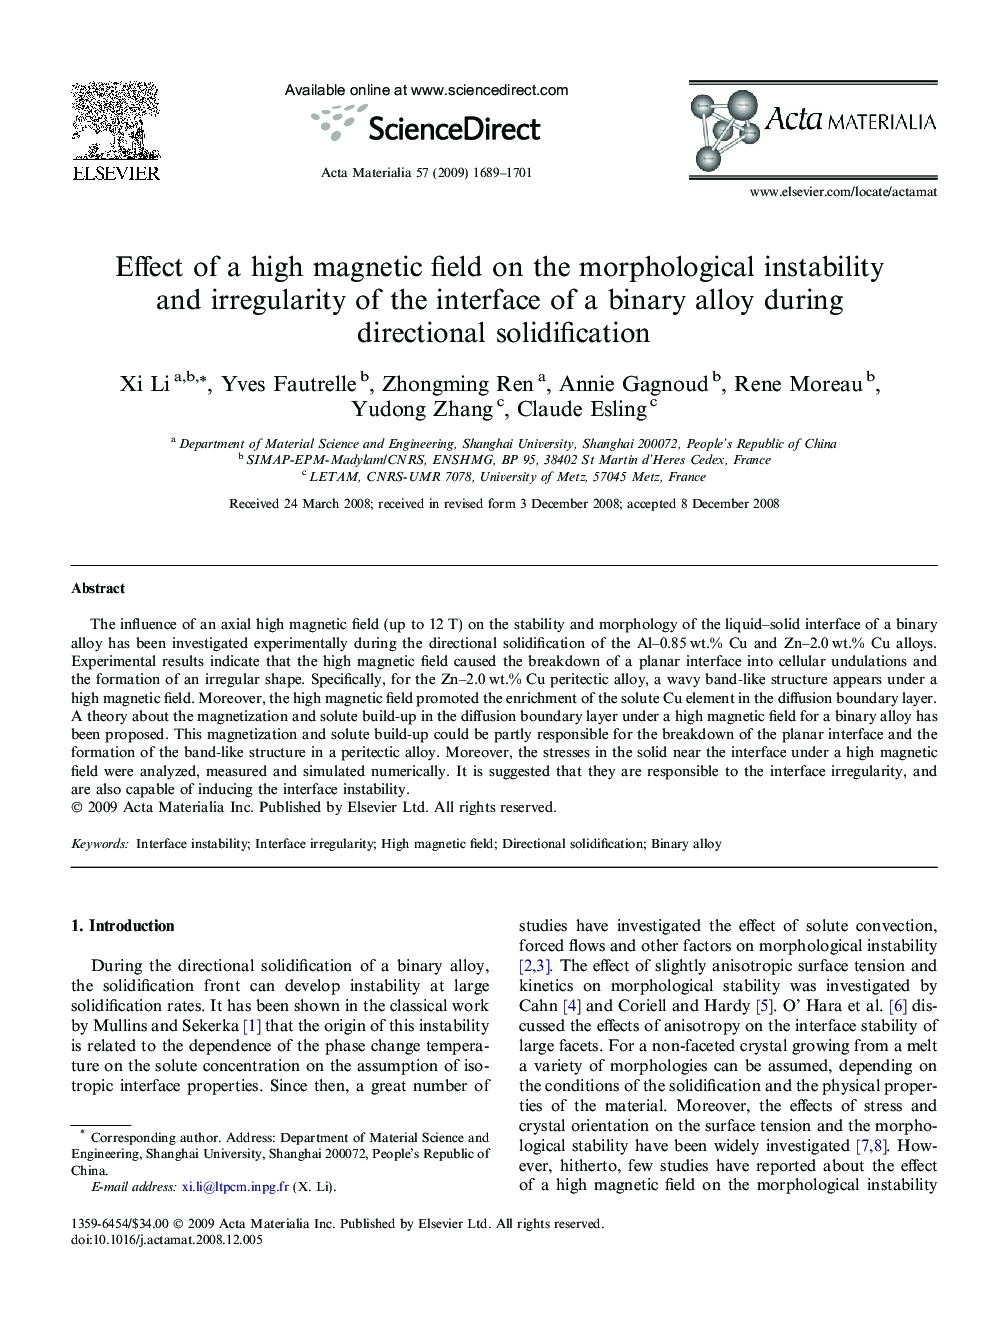 Effect of a high magnetic field on the morphological instability and irregularity of the interface of a binary alloy during directional solidification